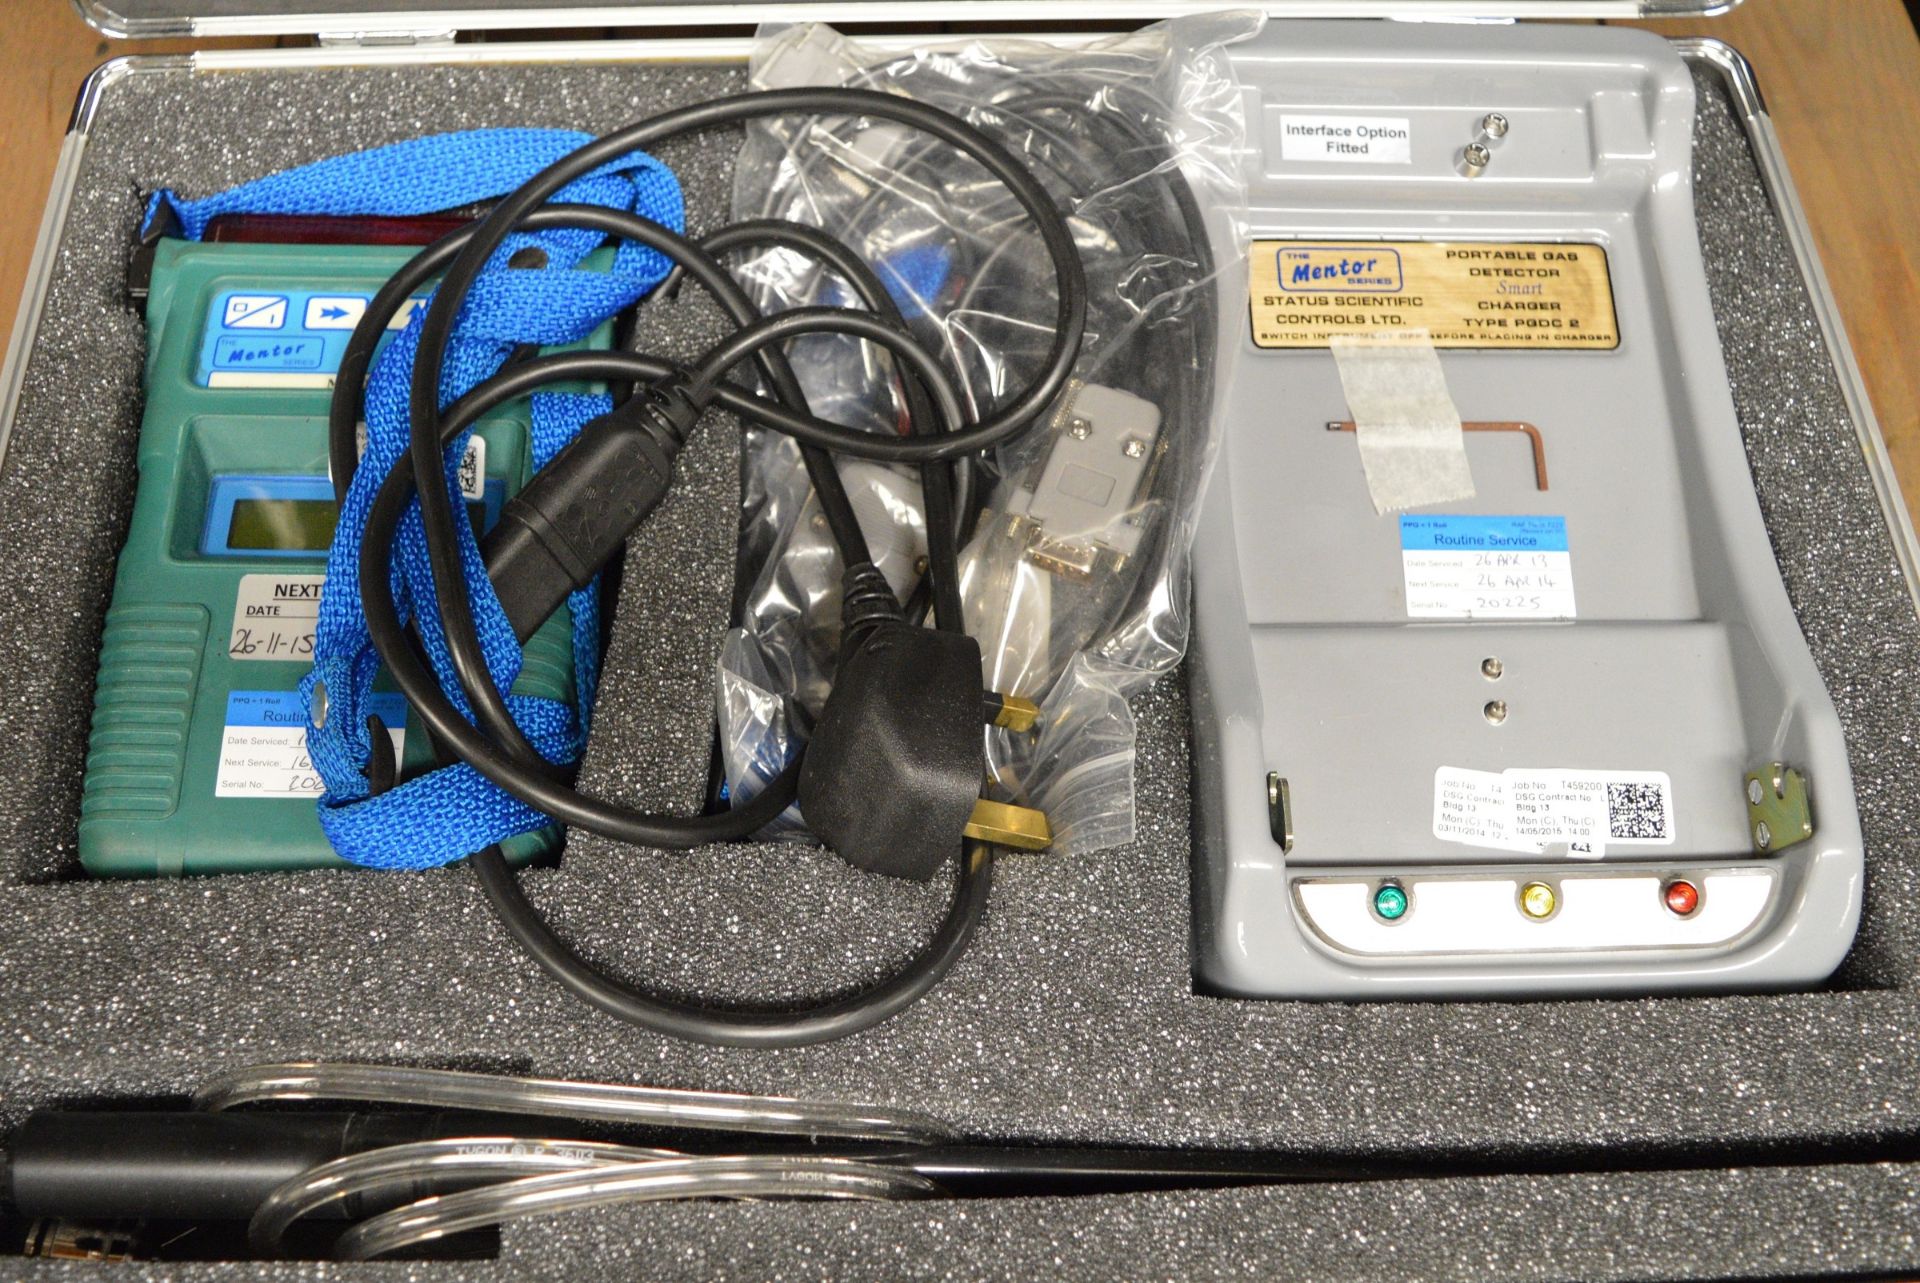 Status Scientific Controls PGD2 The Mentor Series Portable Gas Detector & Charger - Image 2 of 3